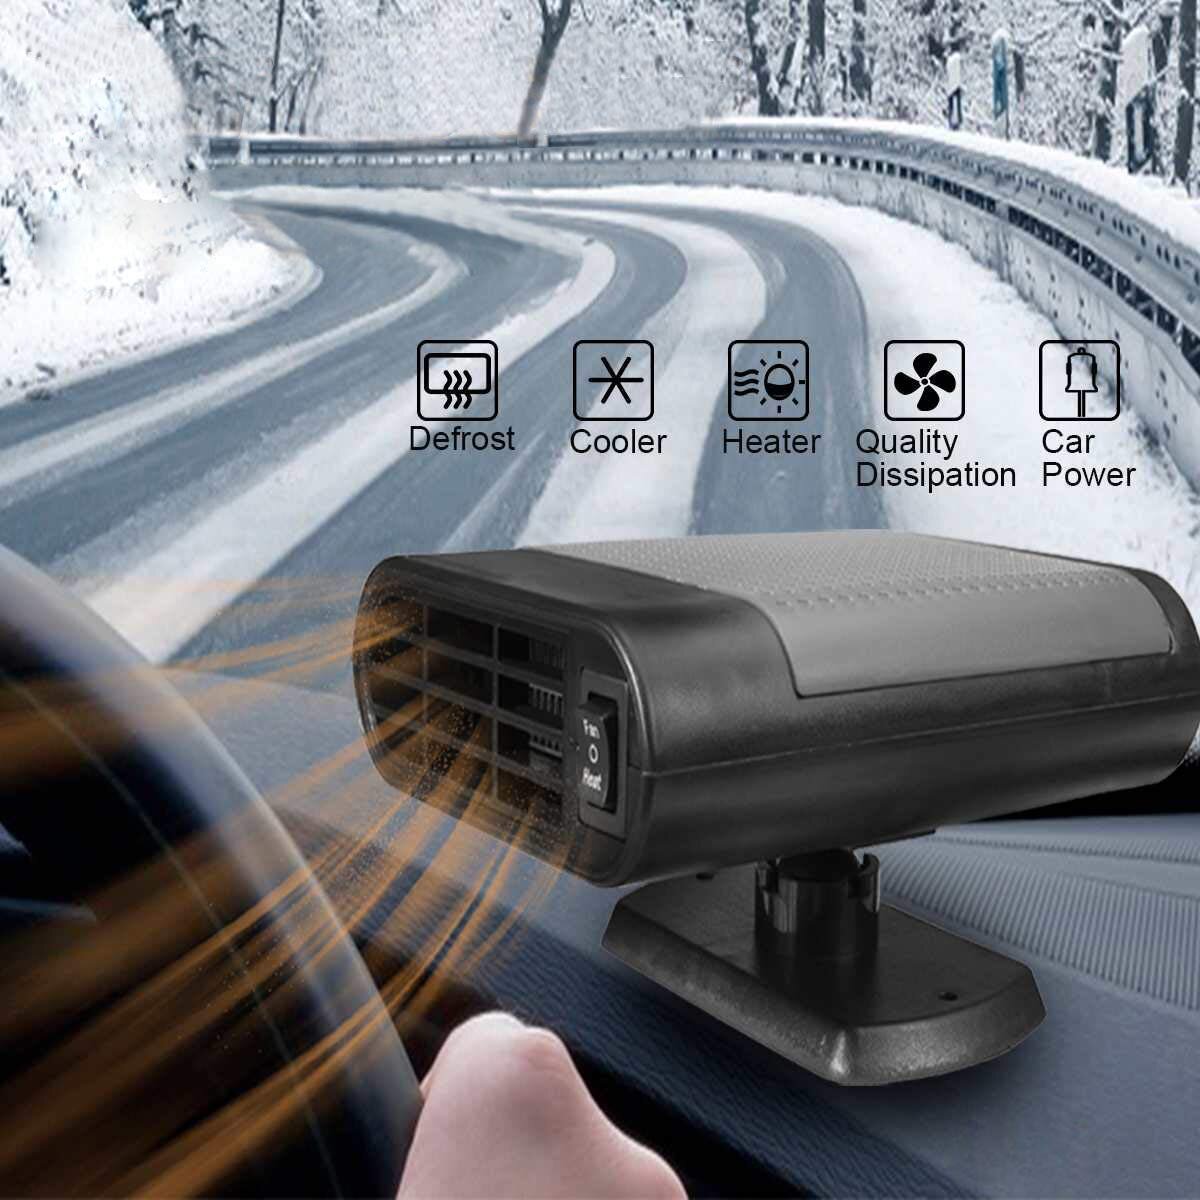 Upgrade Car Heater Gray 2 in 1 Portable Fast Heating Car Heater with Heating & Cooling Function Defroster Defogger 12V 150W Automobile Windscreen De-Icer